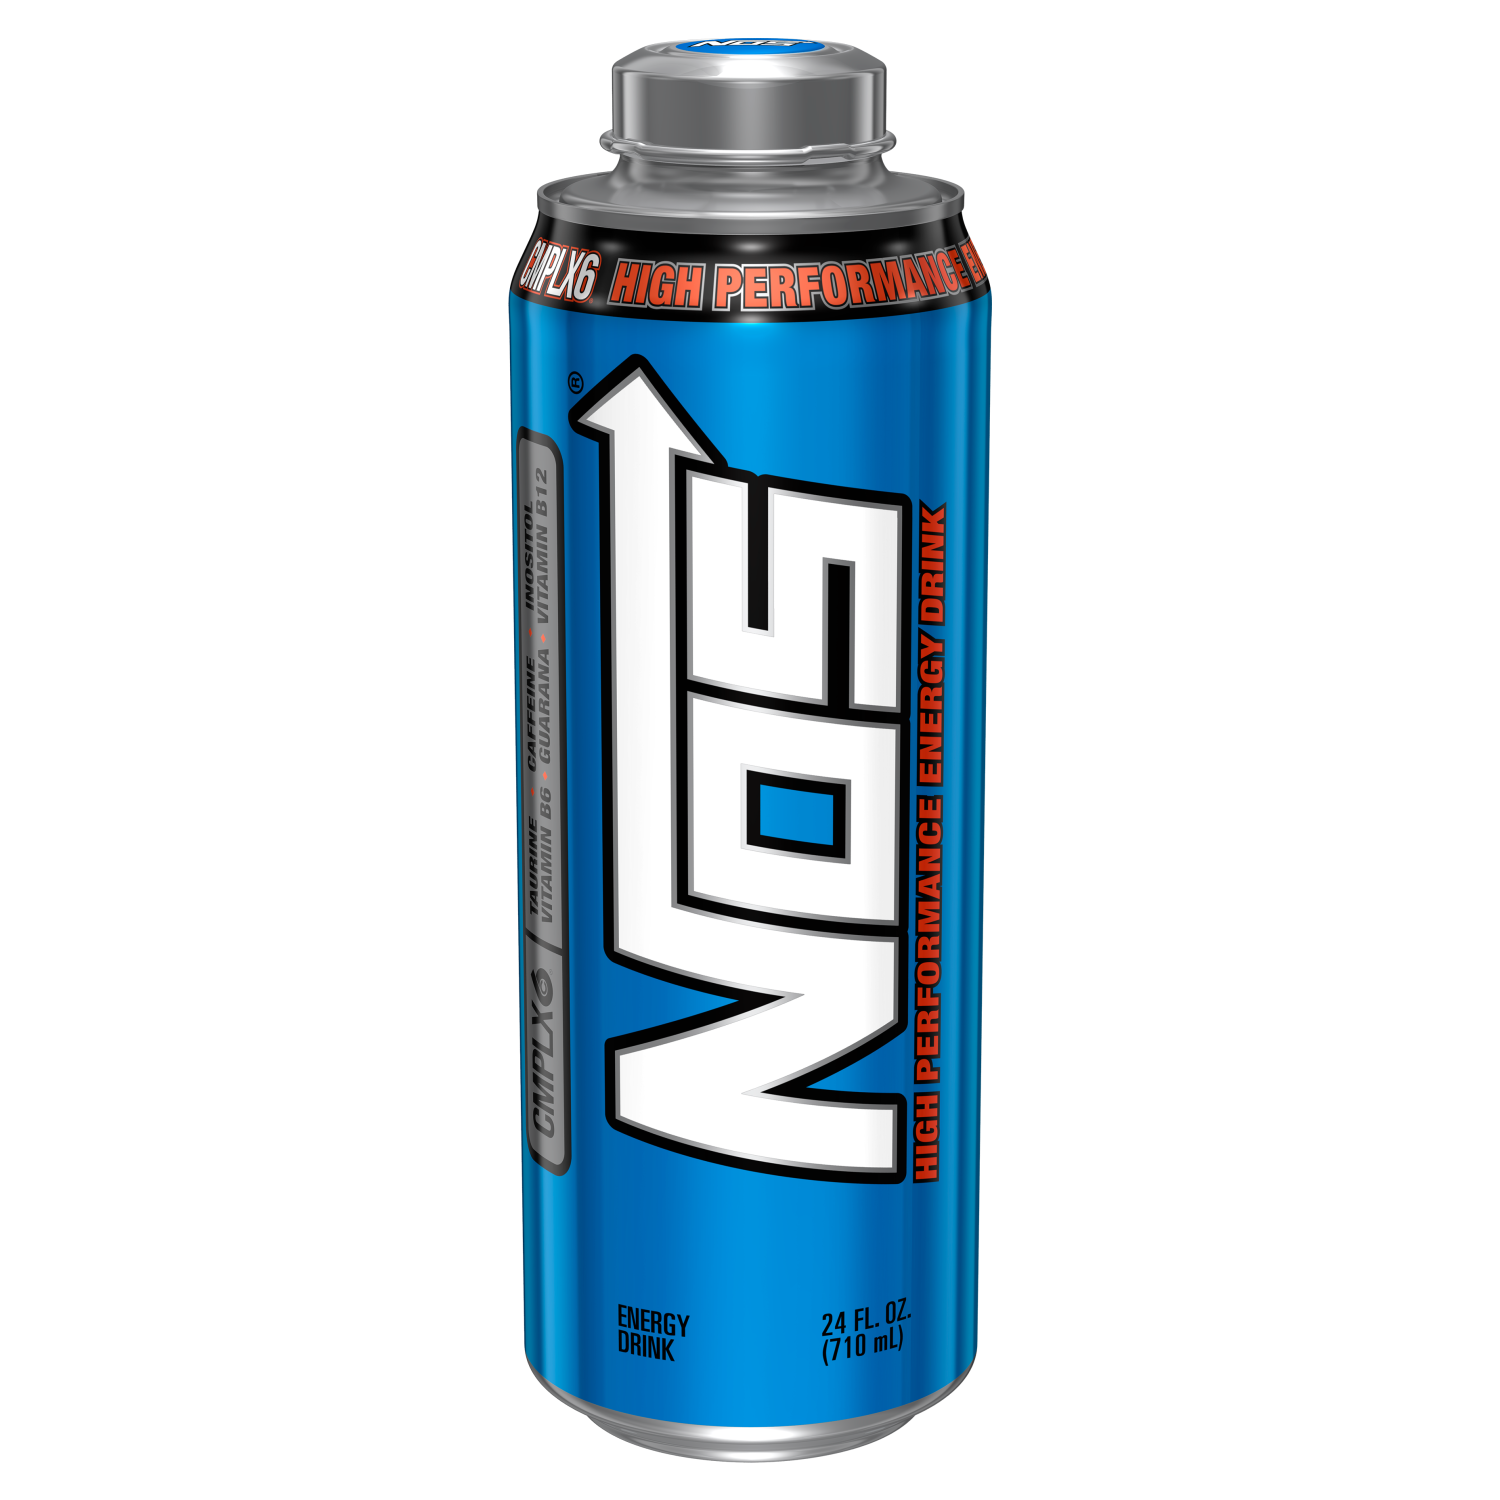 slide 1 of 4, NOS 24oz can of kick-ass. Our #1 seller, NOS Original, provides great-tasting fuel to #GetAfterIt. Available in 16oz. can, 8-pack, or 24-pack. Fuel Up. Fire Up. 100 mile an hour power. Thundering from top gear to no fear, the super-charged take charge. It's time to strap in, or sit it out. How Hard Will You Drive? High Performance Energy., 24 oz